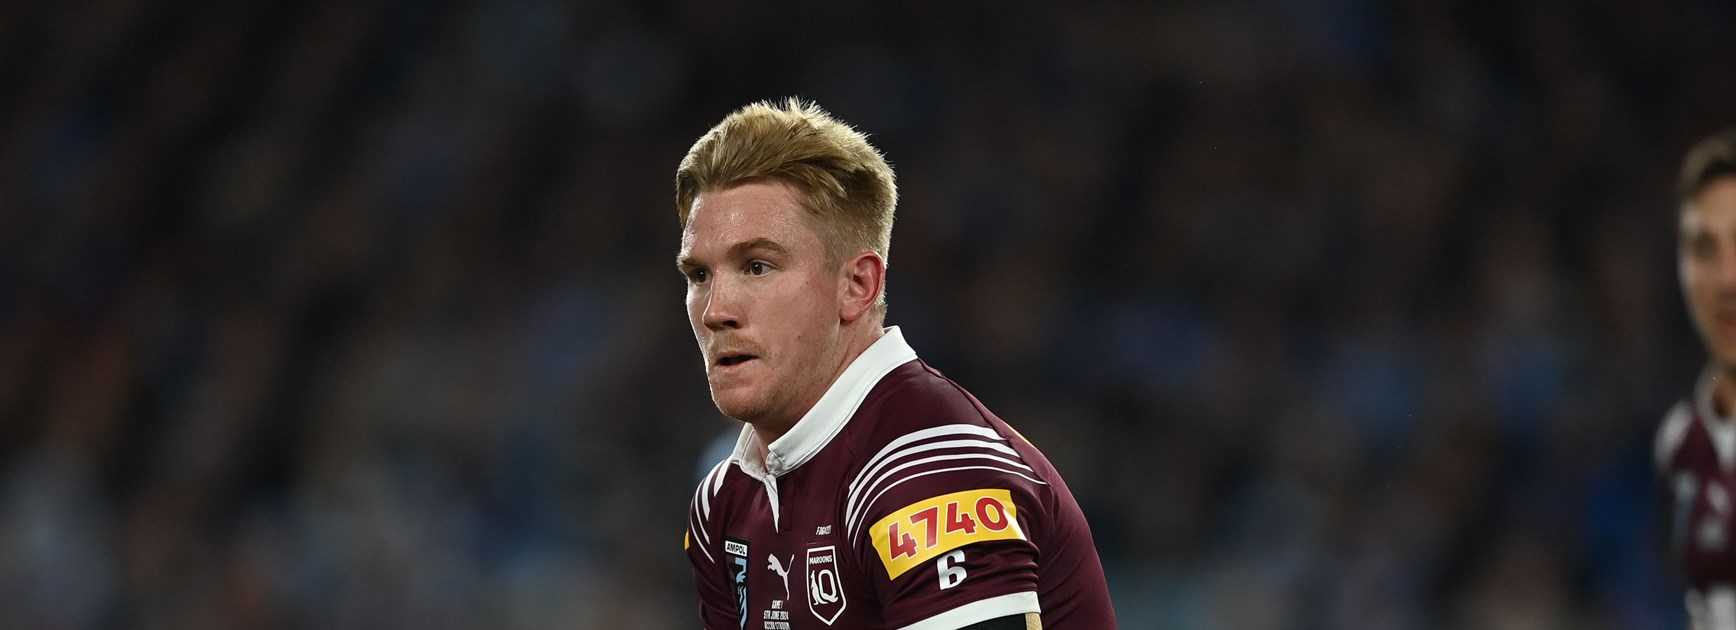 Late changes: Four Maroons stars to back up v Warriors